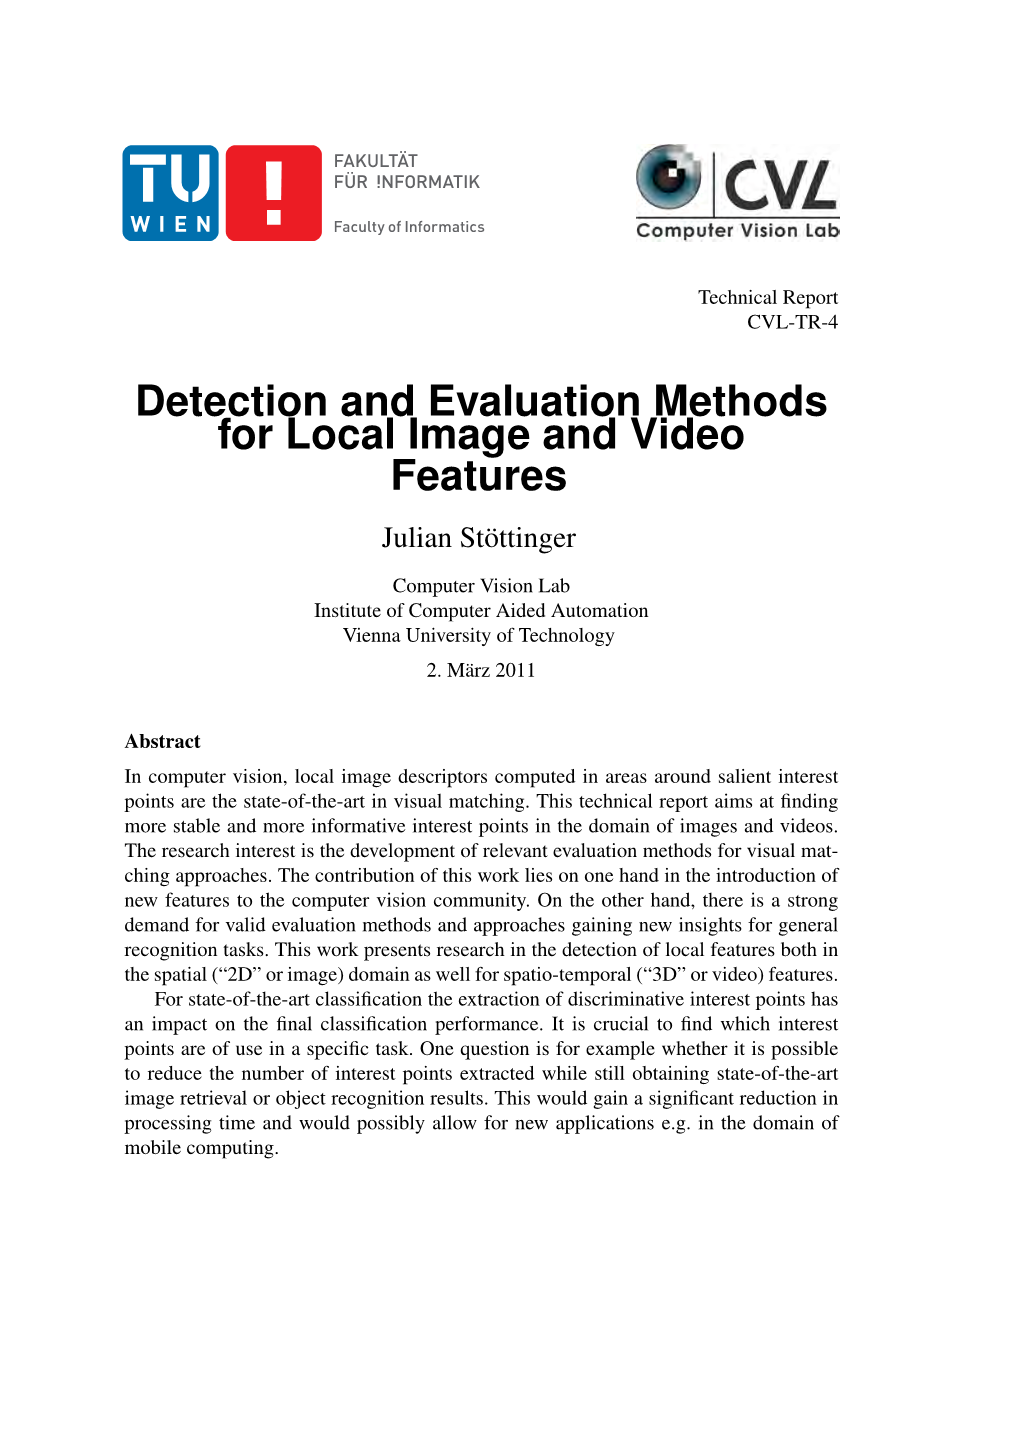 Detection and Evaluation Methods for Local Image and Video Features Julian Stottinger¨